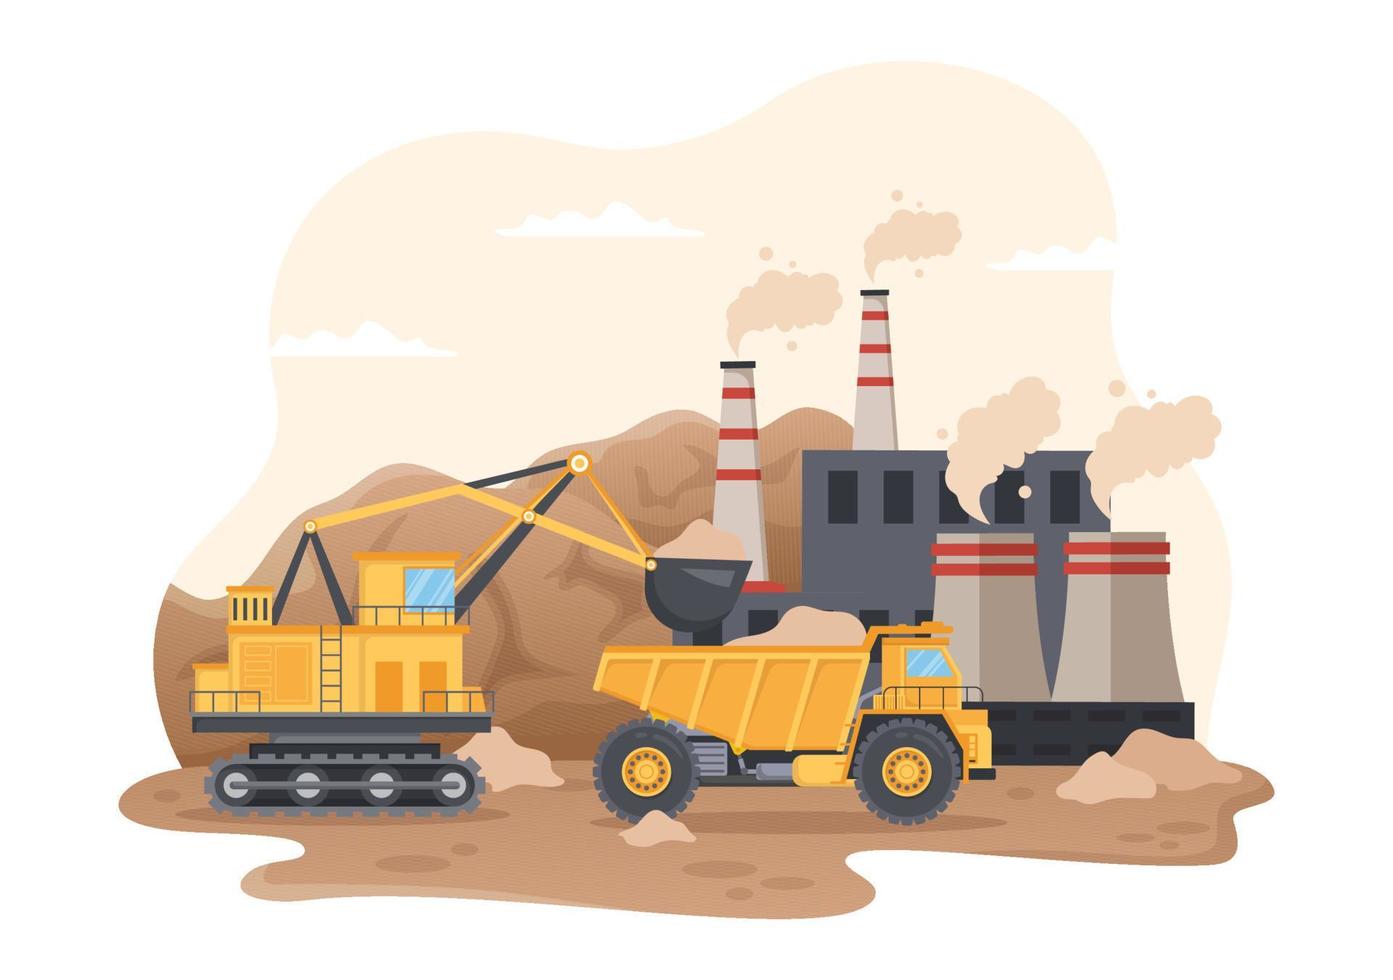 Mining Company with Heavy Yellow Dumper Trucks for Coal Mine Industrial Process or Transportation in Flat Cartoon Hand Drawn Templates Illustration vector